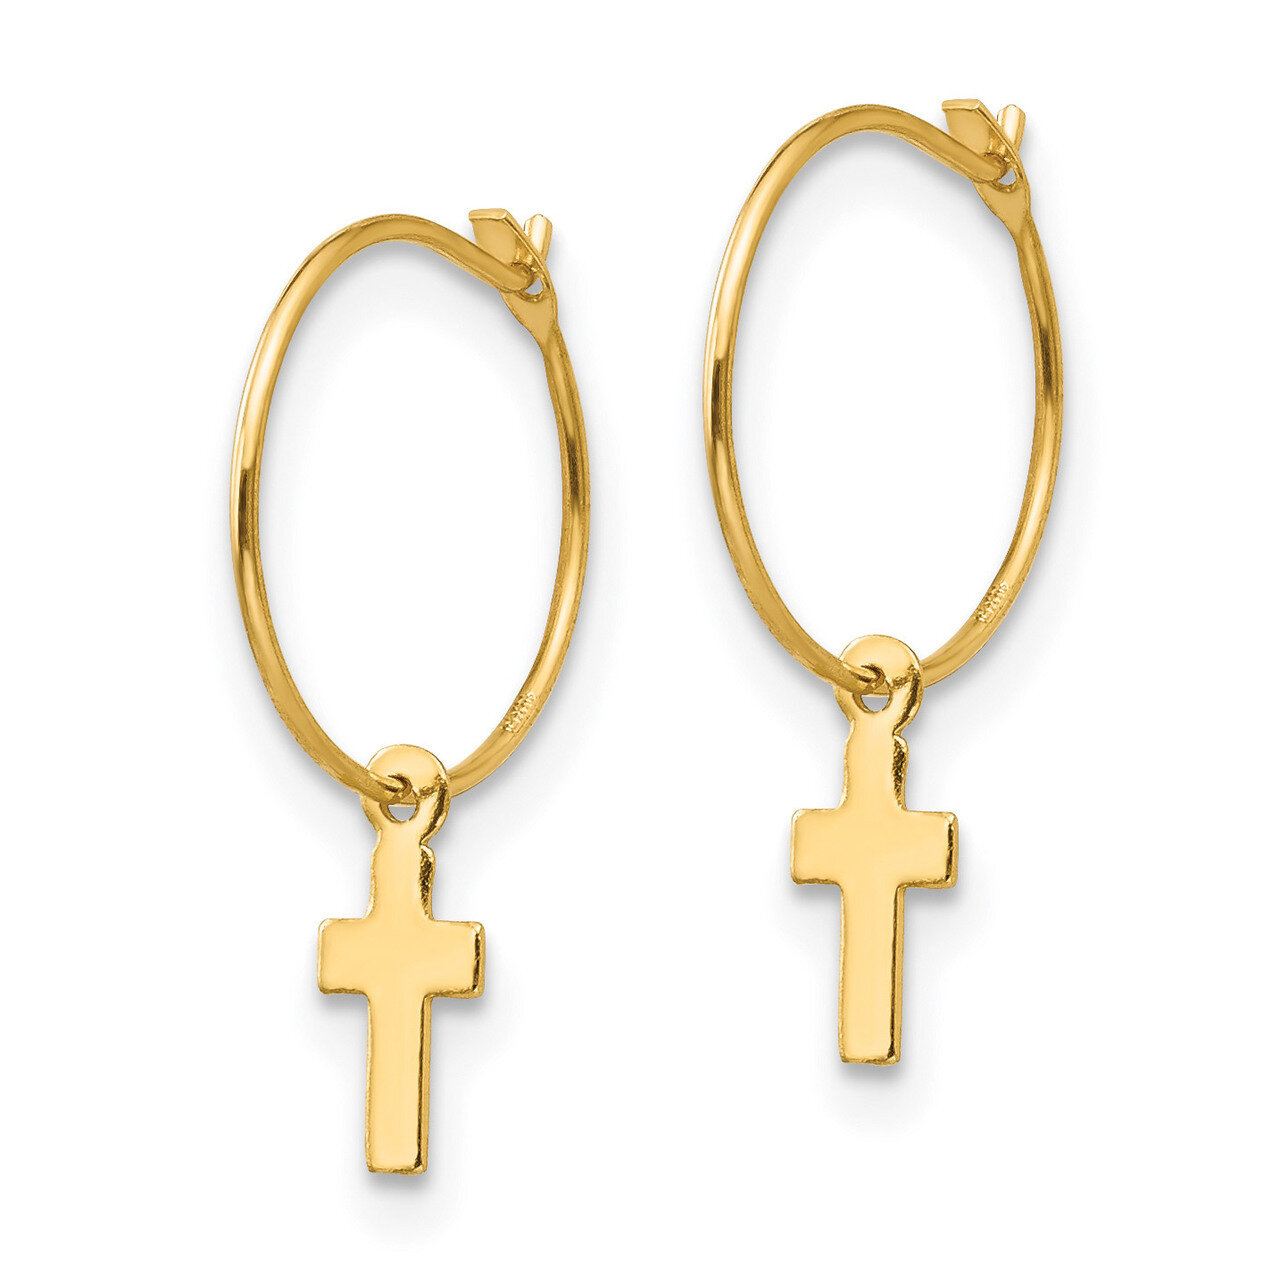 Endless Hoop with Small Cross Earrings - 14k Gold SE342